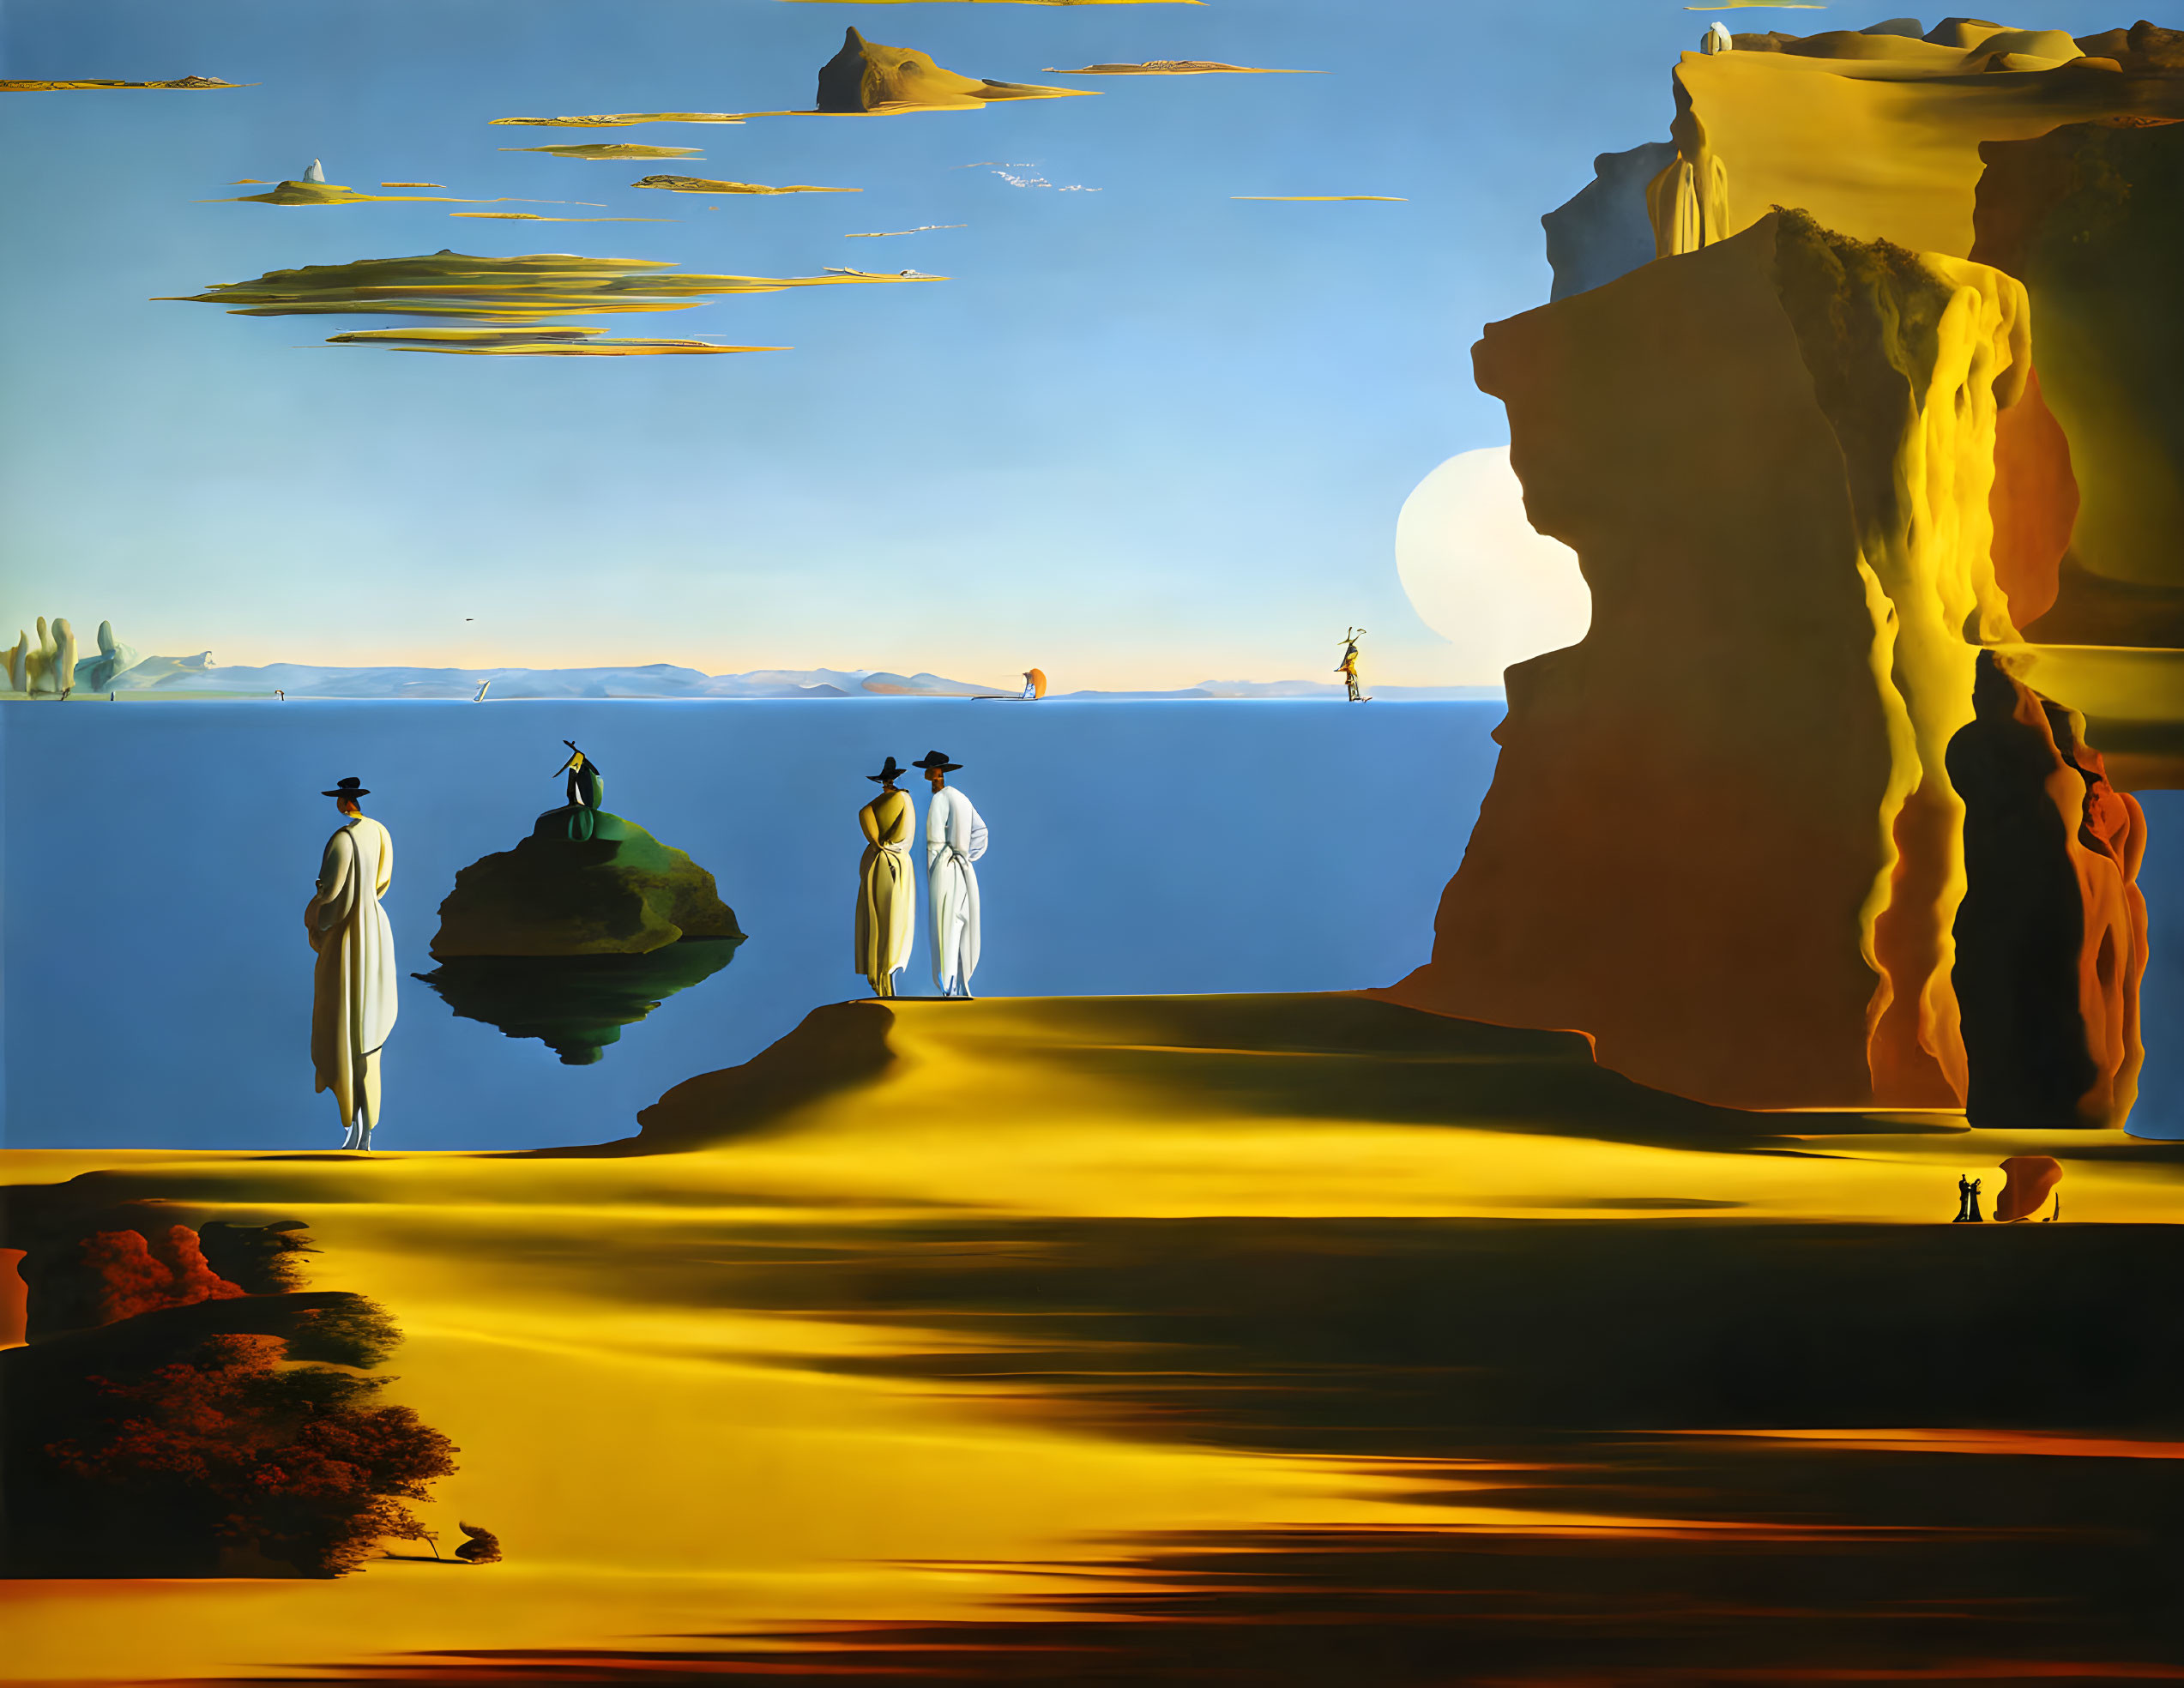 Surrealist painting: elongated shadows, robed figures, disjointed rock formations, golden sky